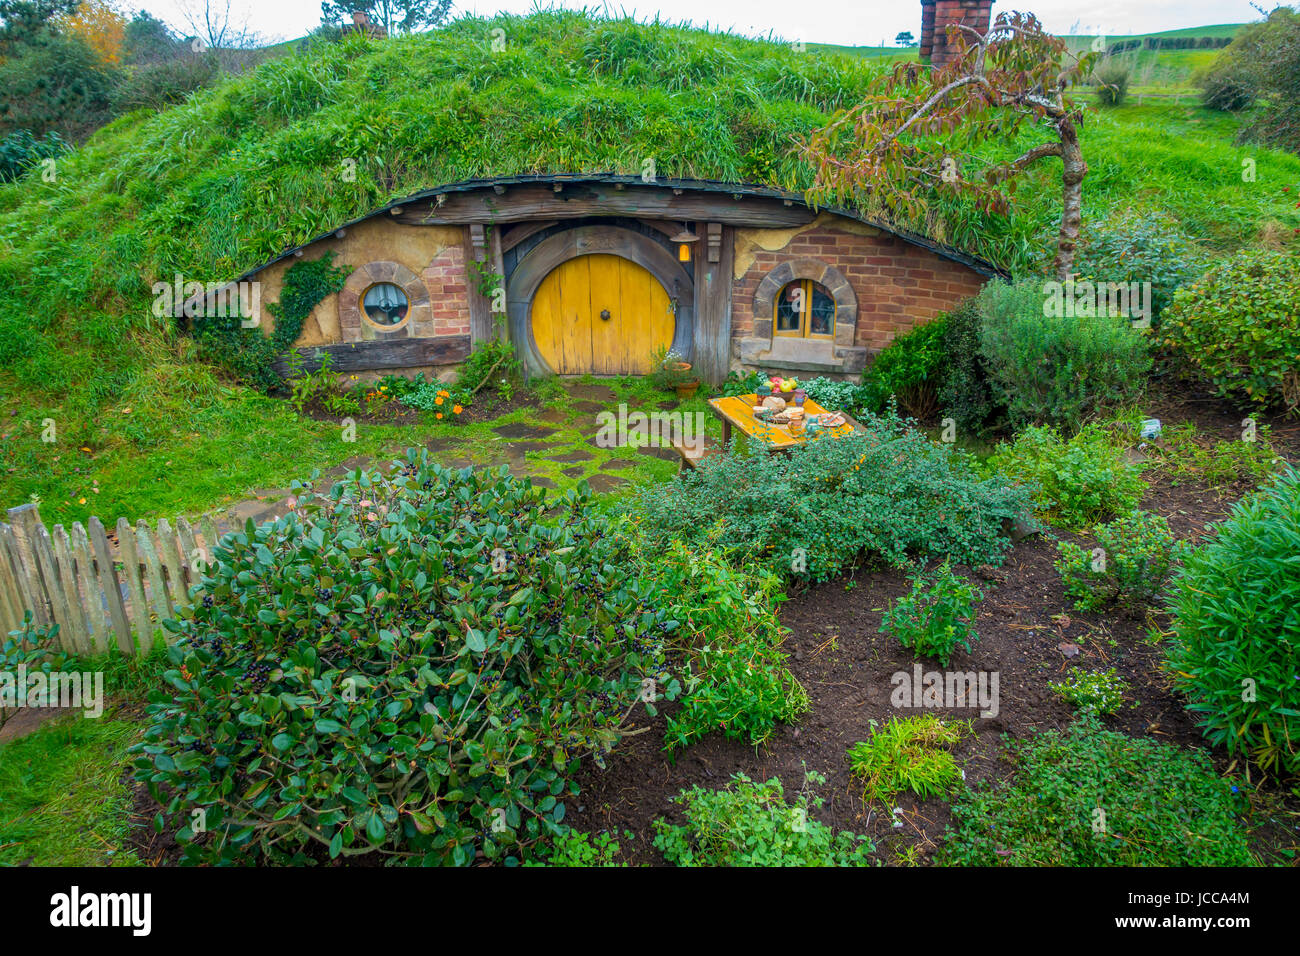 NORTH ISLAND, NEW ZEALAND- MAY 16, 2017: Hobbit house with yellow door, hobbiton movie set, site made for movies: Hobbit and Lord of the ring in Matam Stock Photo